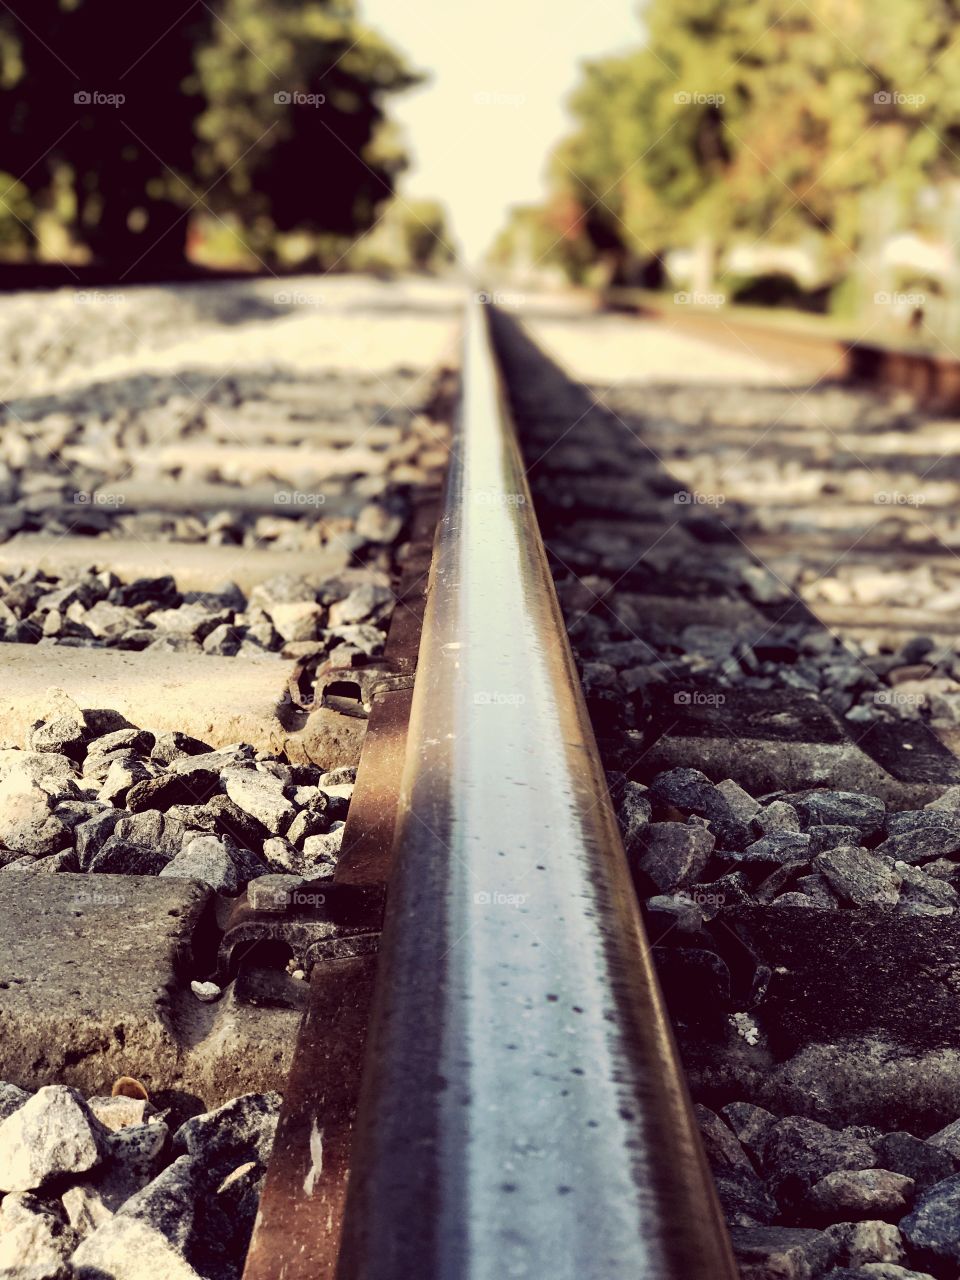 Stay on track, you'll get there.